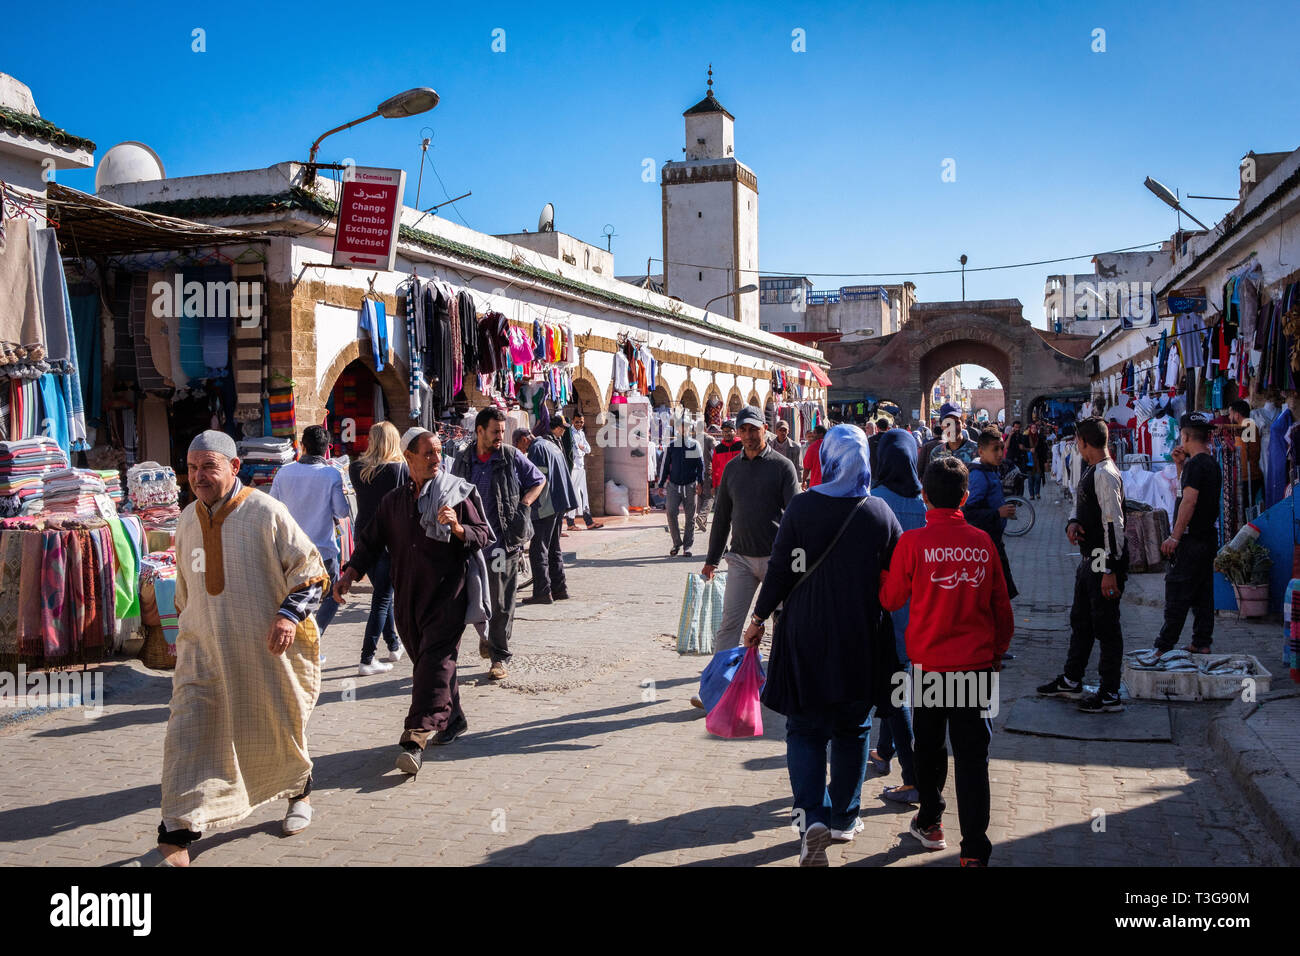 Morocco. Essaouria. City and port on the Atlantic coast of Morocco, with its medina registered as a UNESCO World Heritage Site. Inhabitants and shops  Stock Photo